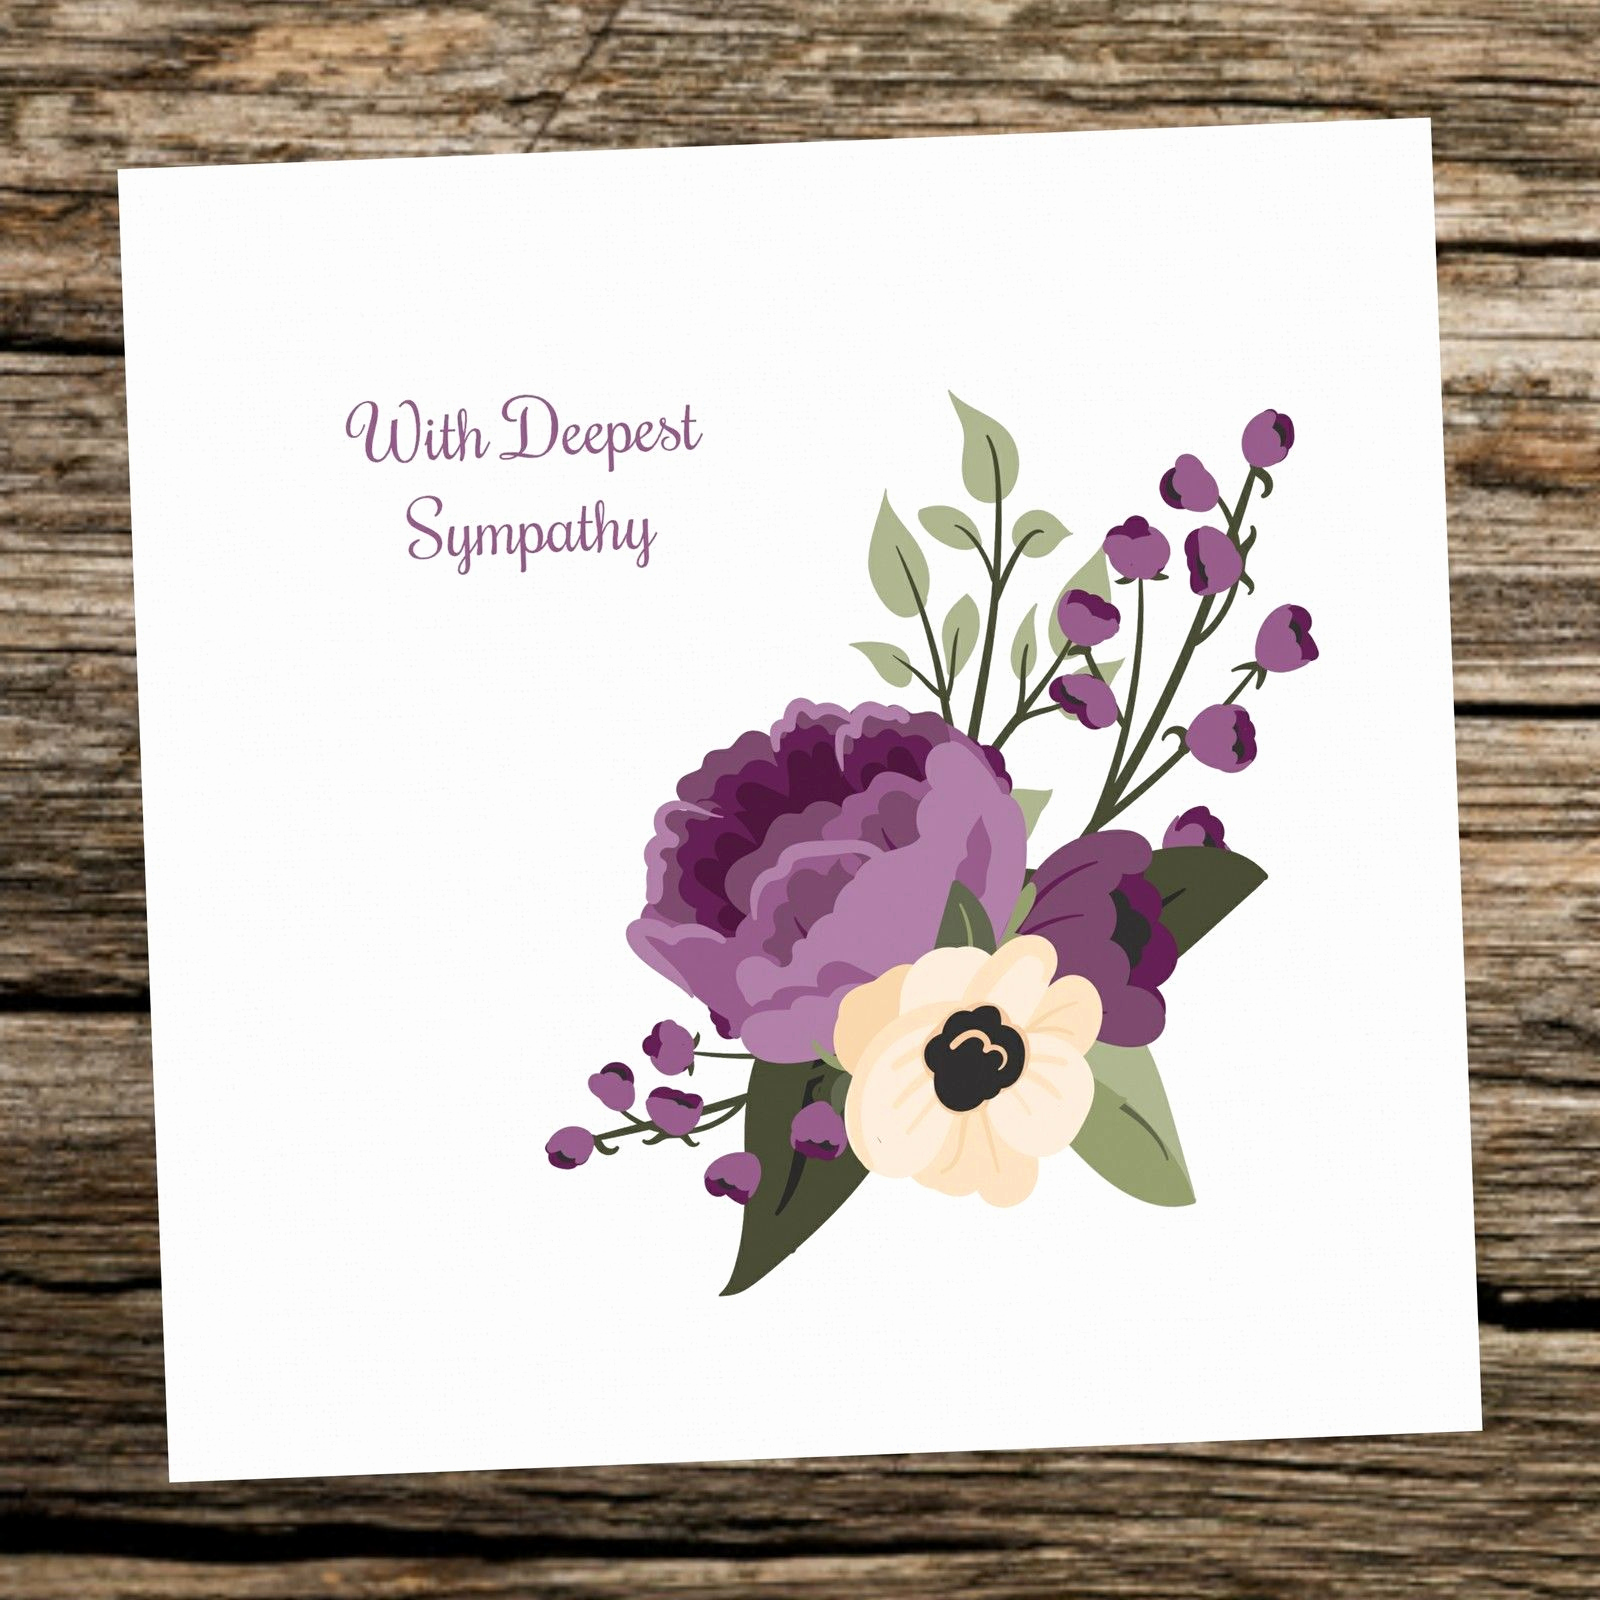 Print Out Sympathy Cards Awesome Handmade Deepest Sympathy Condolence Card Purple Flower